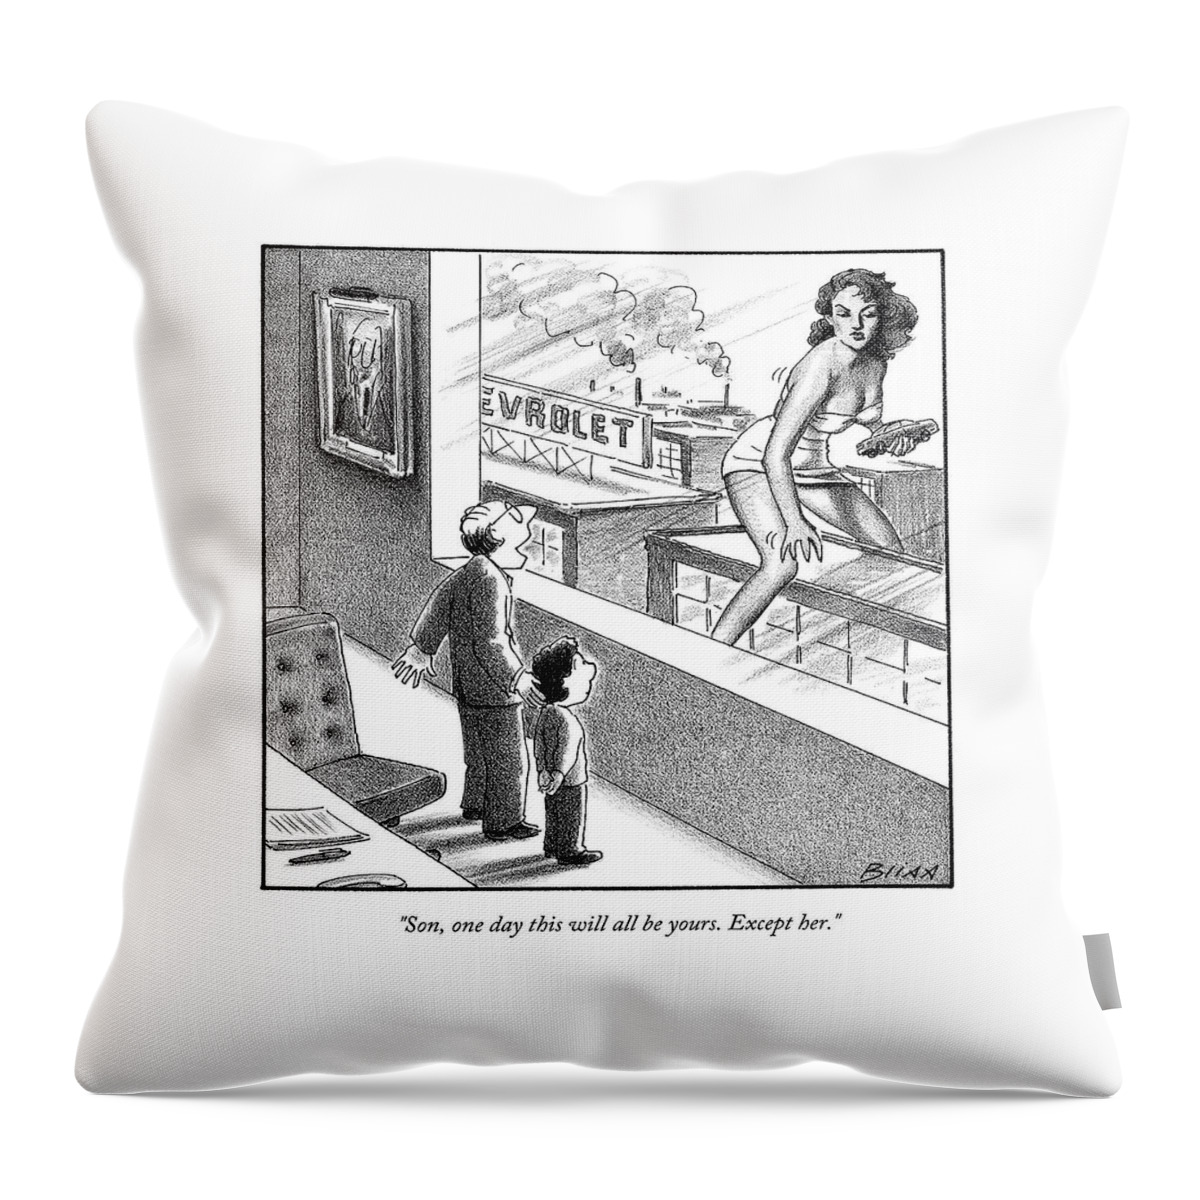 A Man And His Son Gaze At A Beautiful Giant Woman Throw Pillow